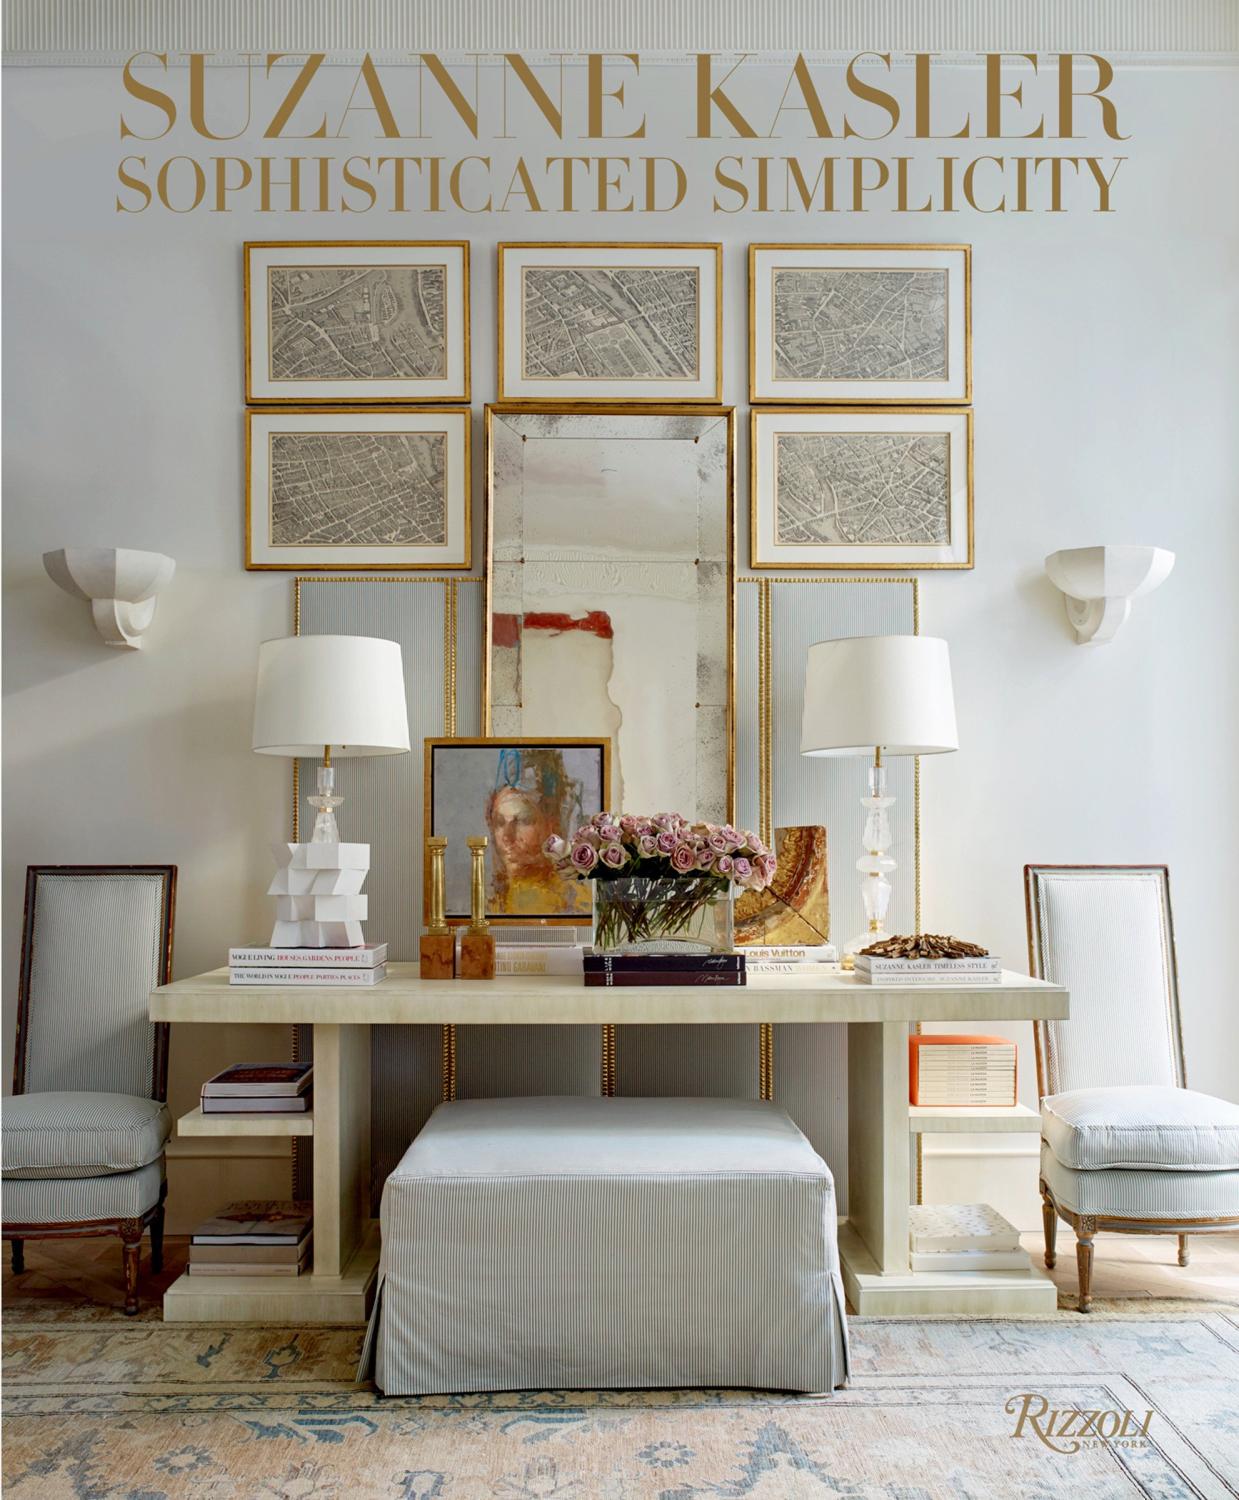 Suzanne Kasler's Sophisticated Simplicity